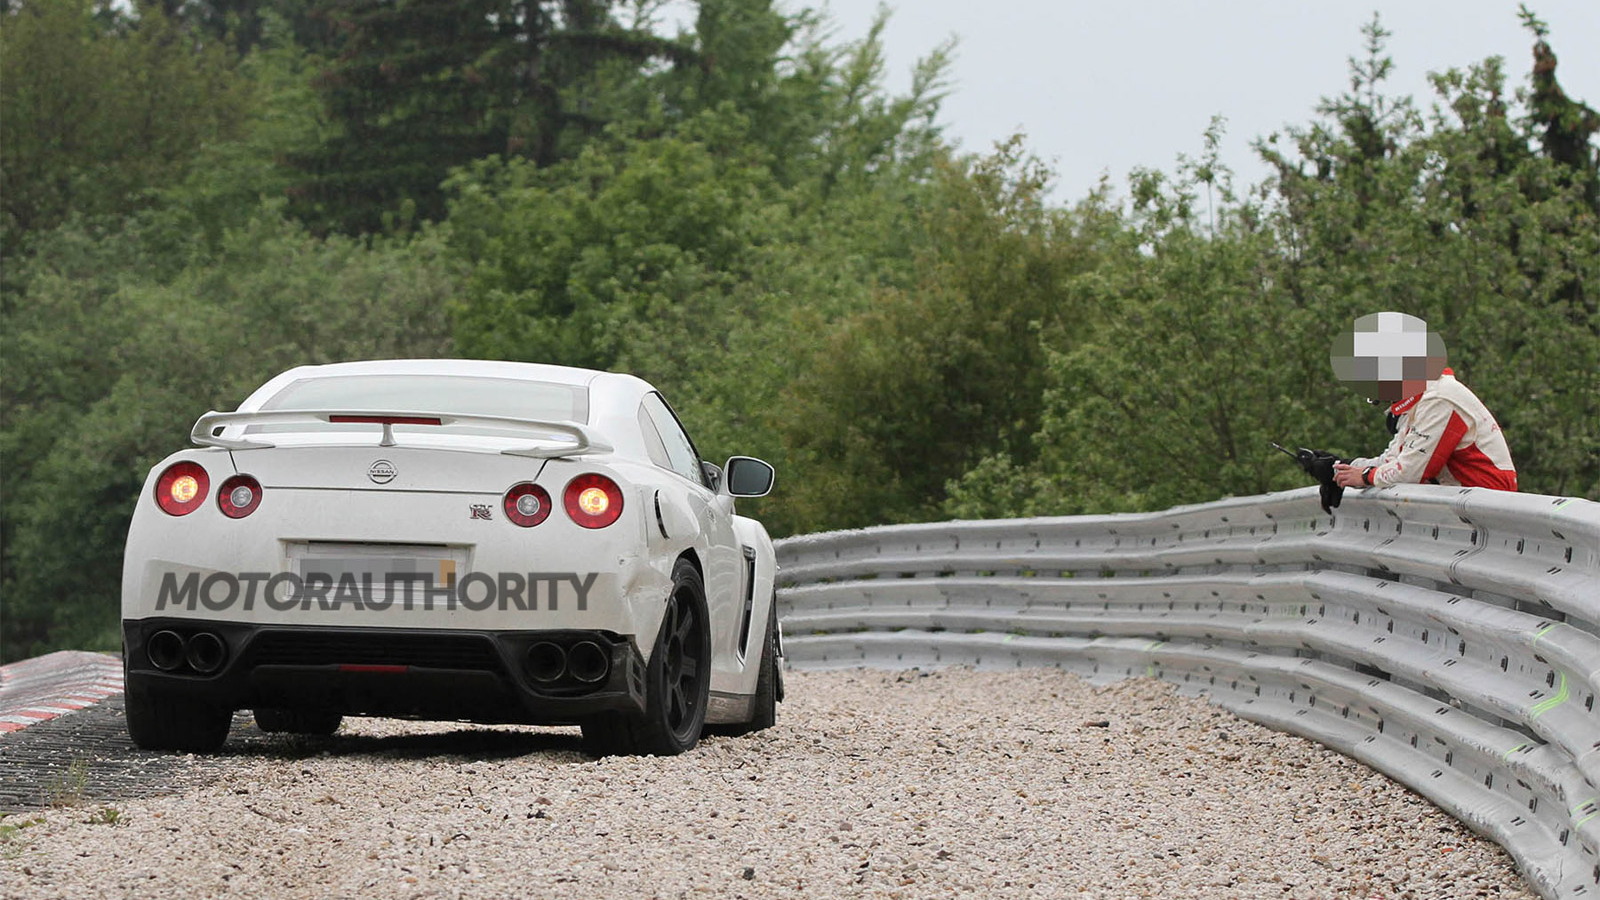 2013 Nissan GT-R that crashed on the Nürburgring-Nordschleife in May, 2012